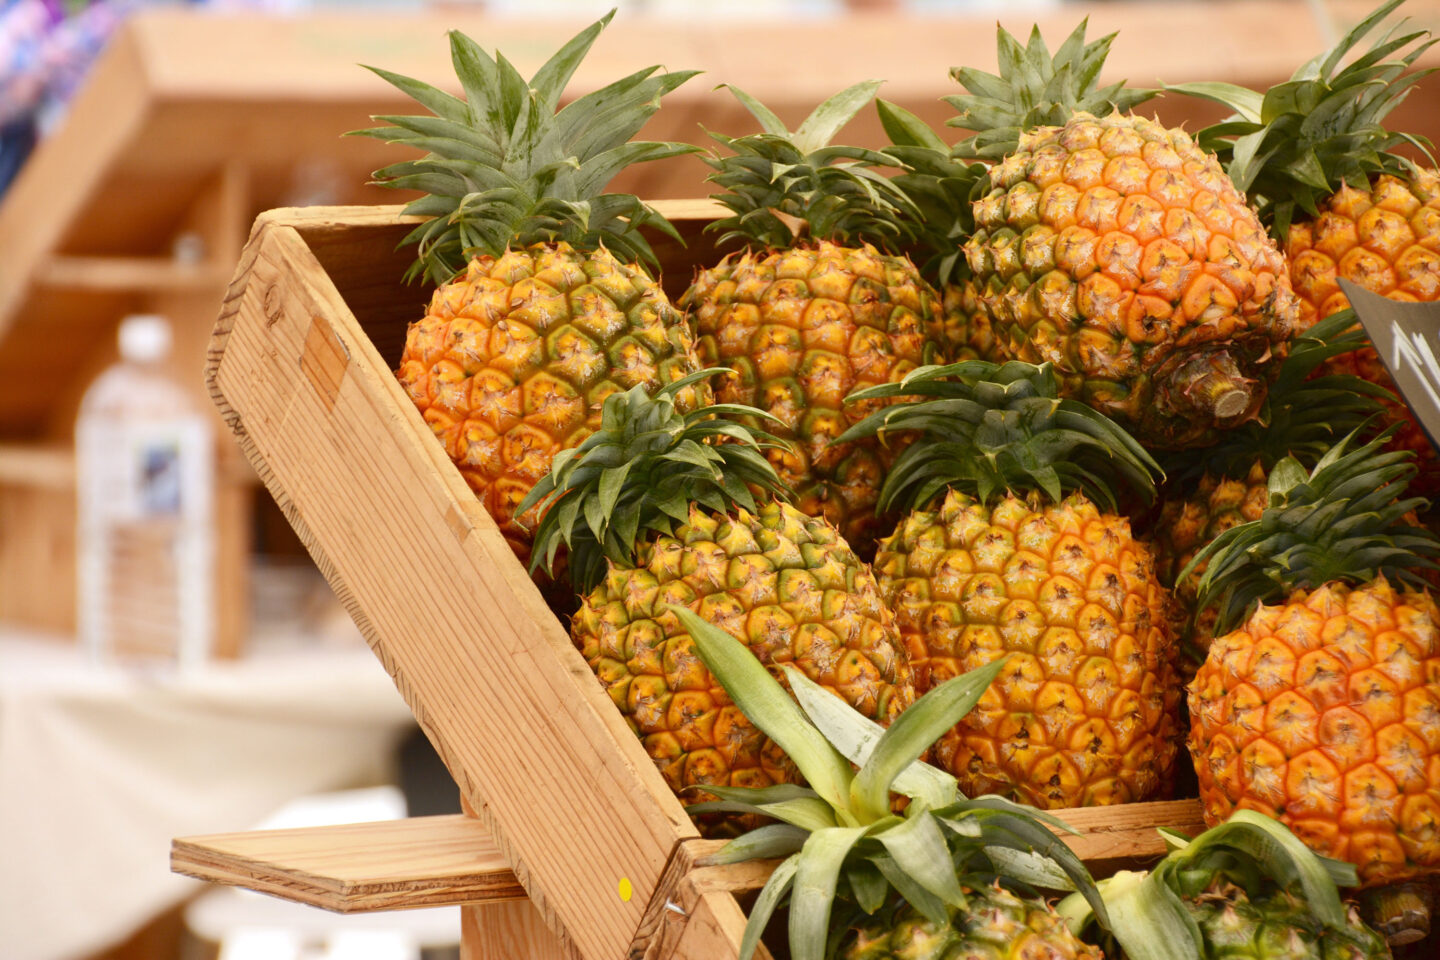 pineapples sold by fruit vendor